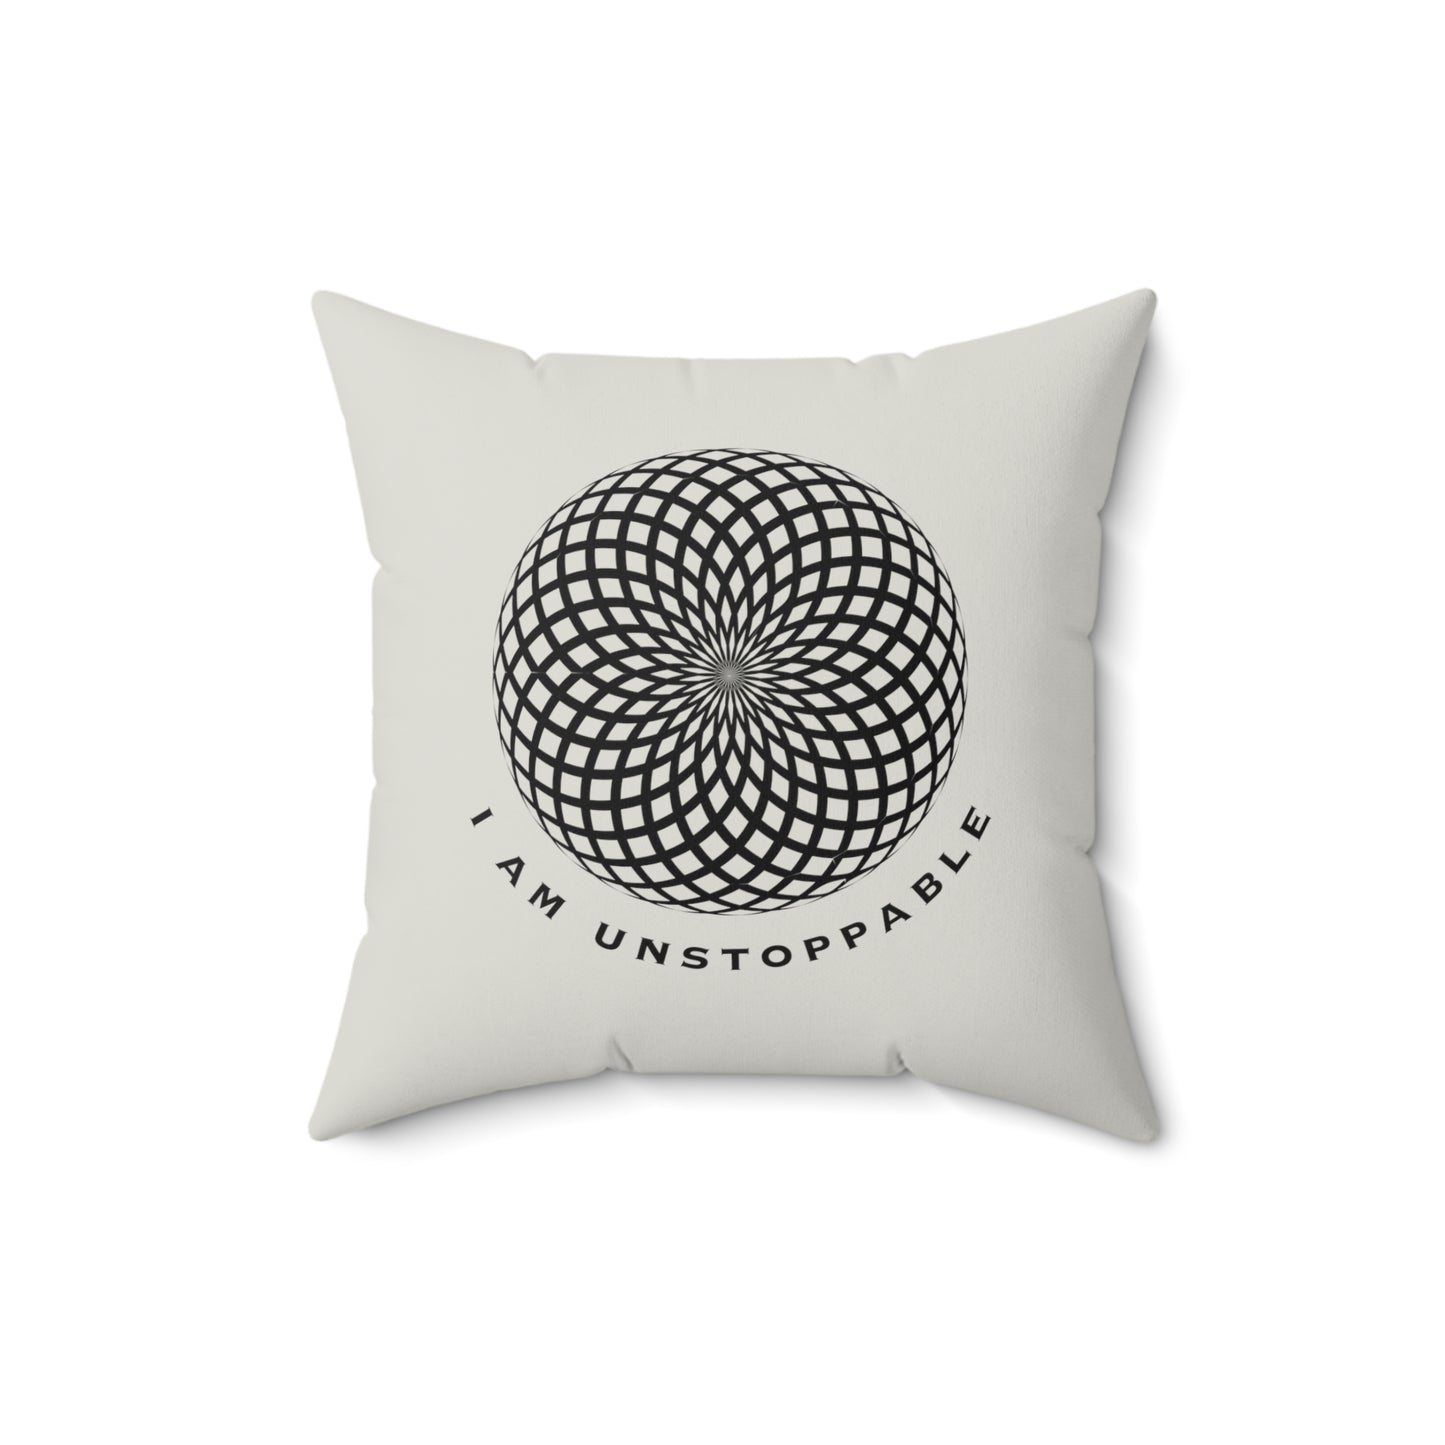 I Am Unstoppable Affirmation Pillow